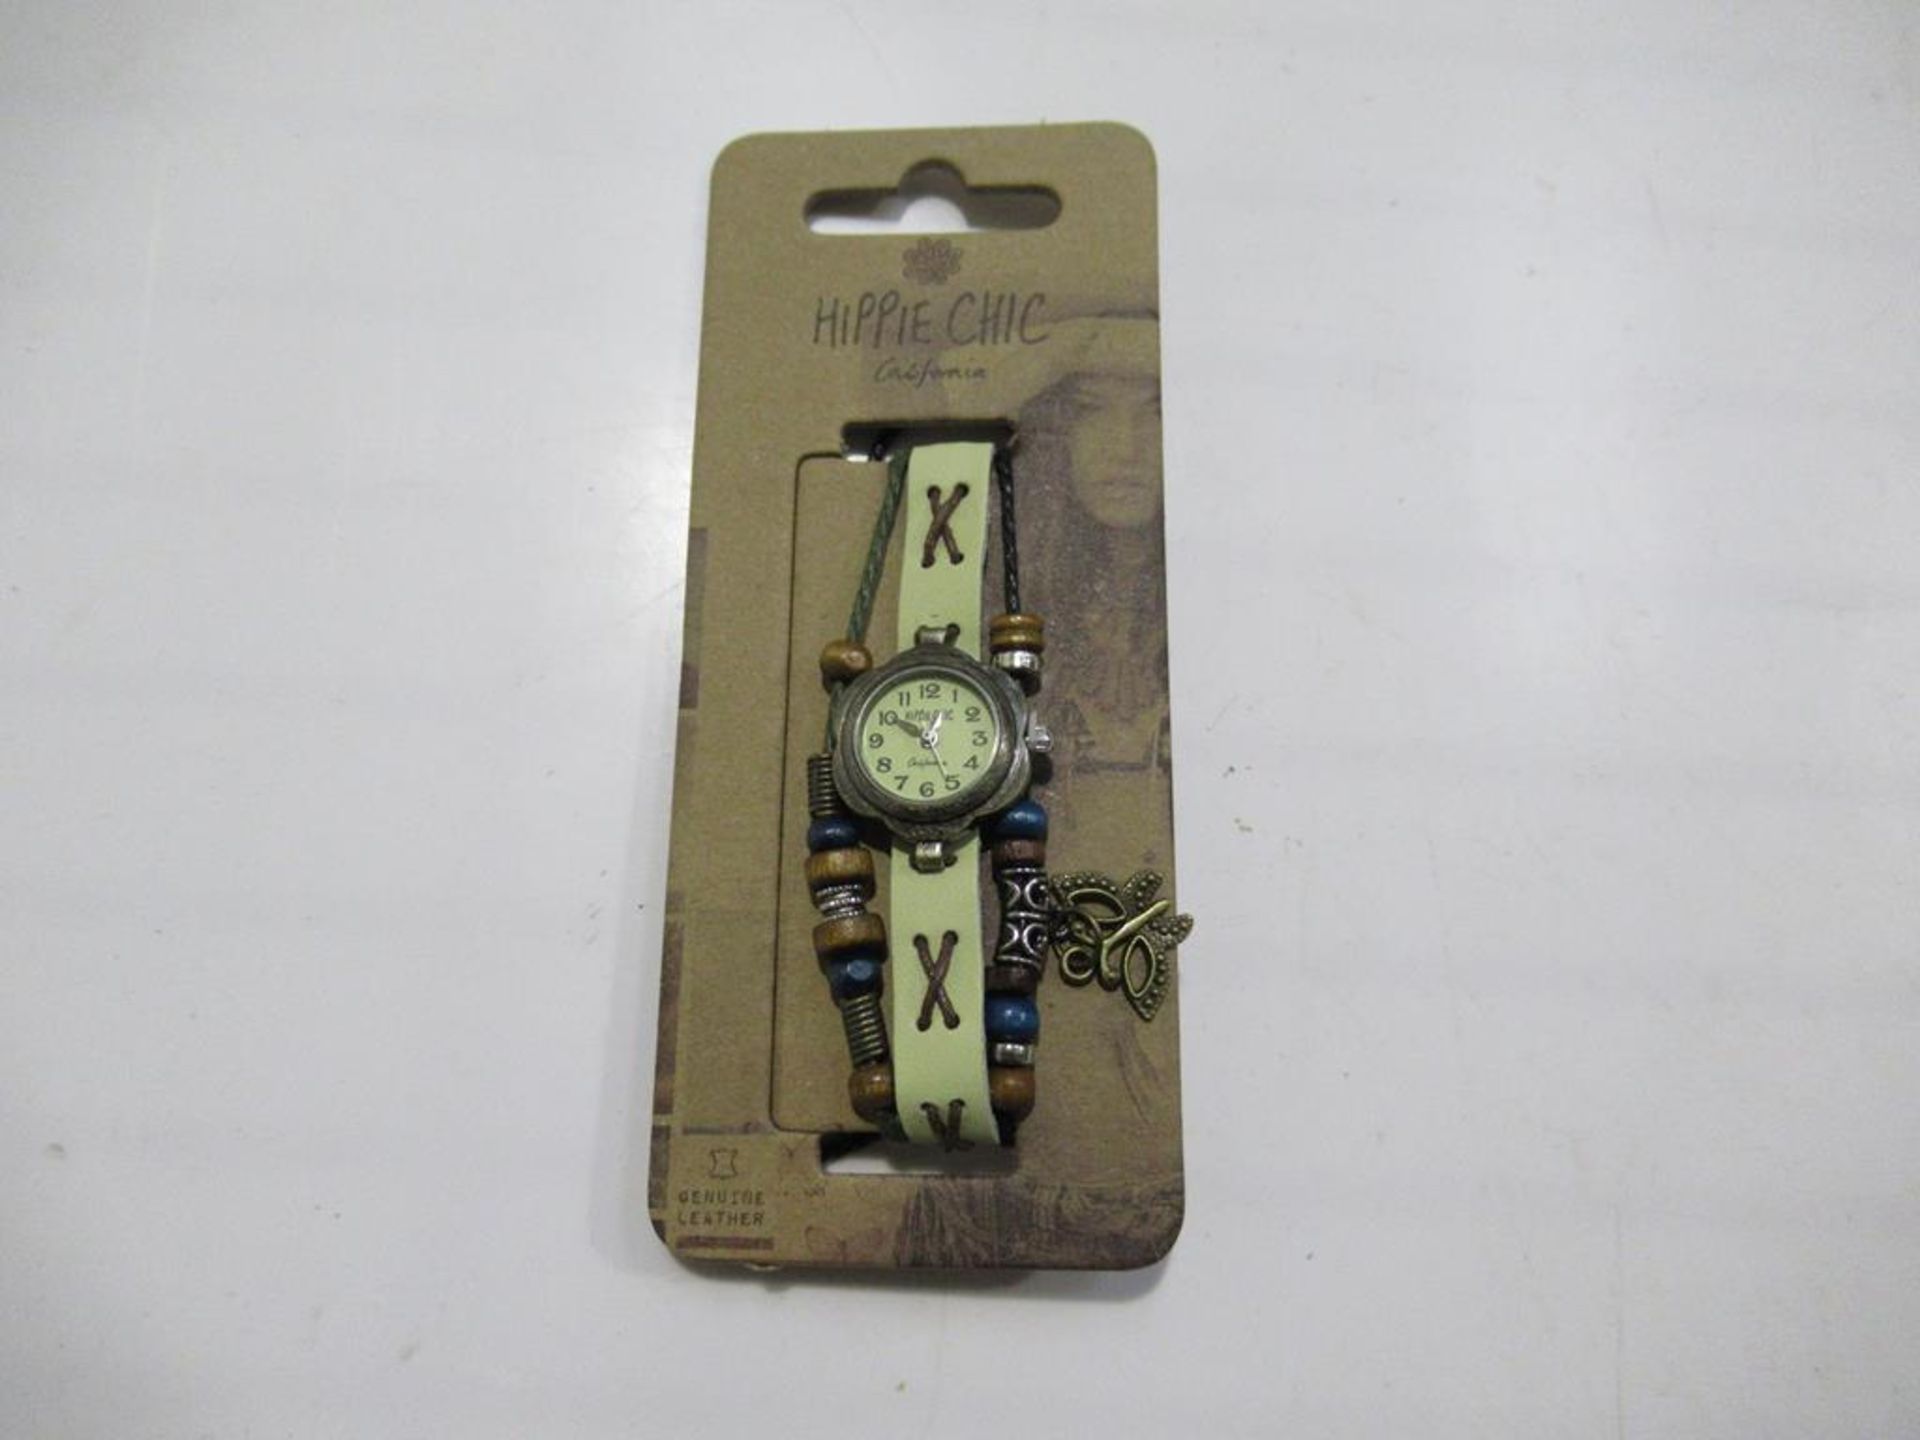 A Box of Hippie Chic 'Harmony' watches un-opened (25) total approx. RP £250